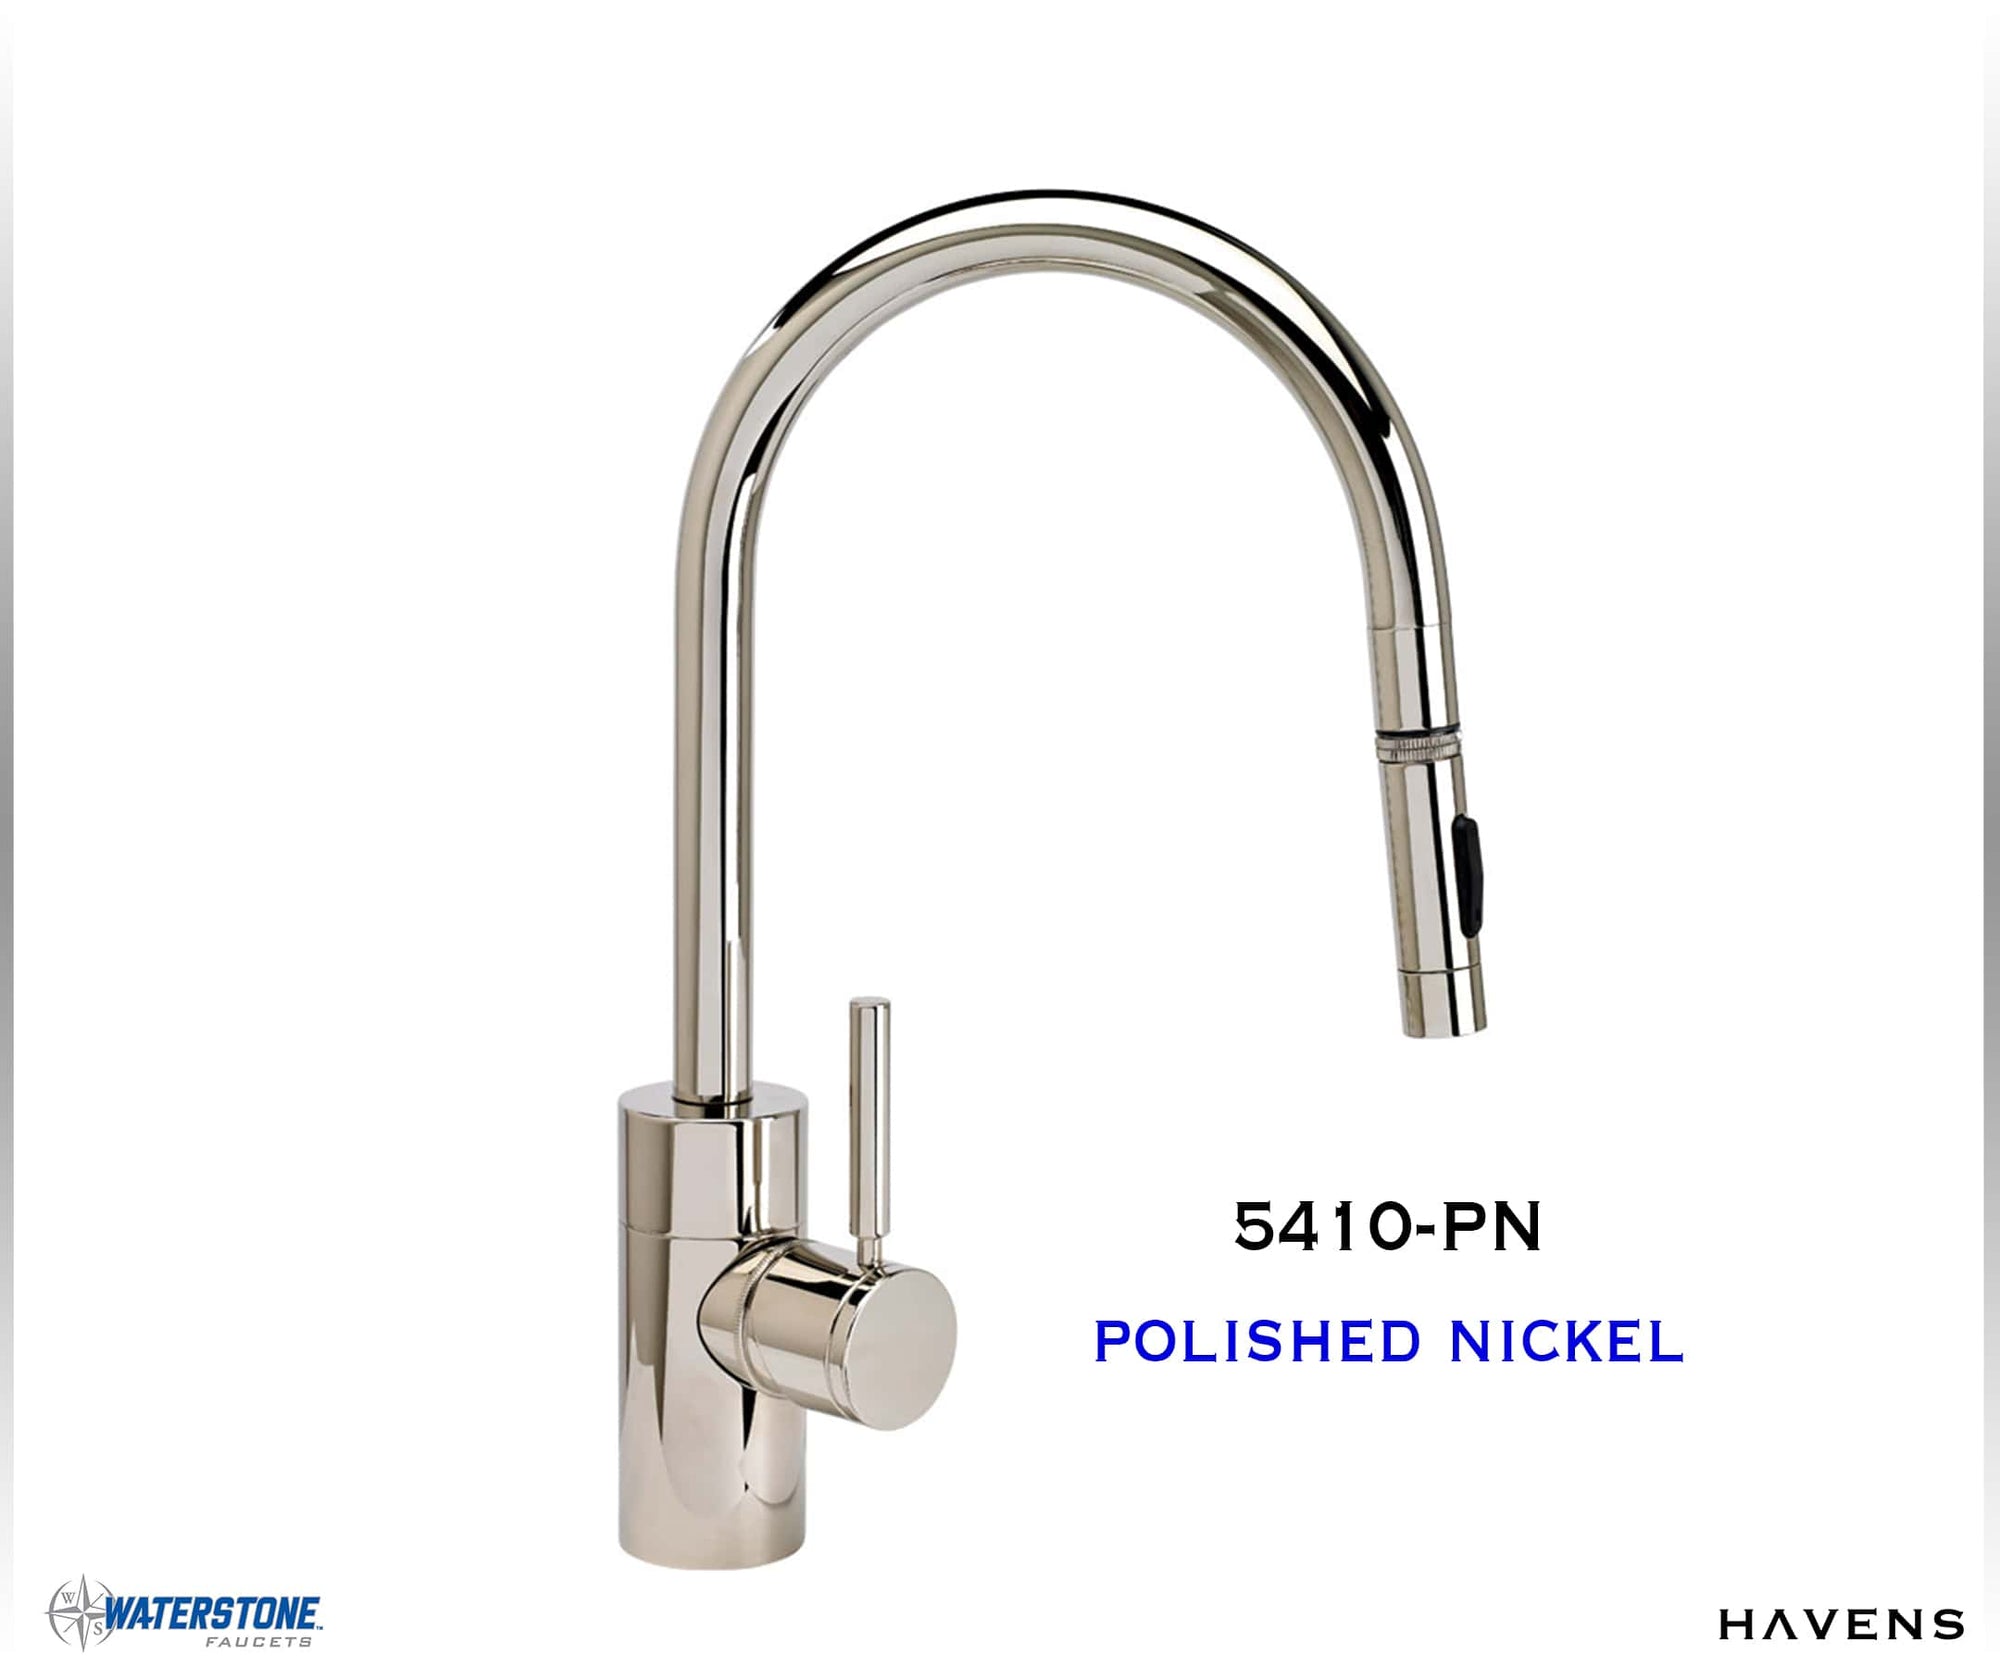 Waterstone Contemporary PLP Pulldown Faucet - 5410